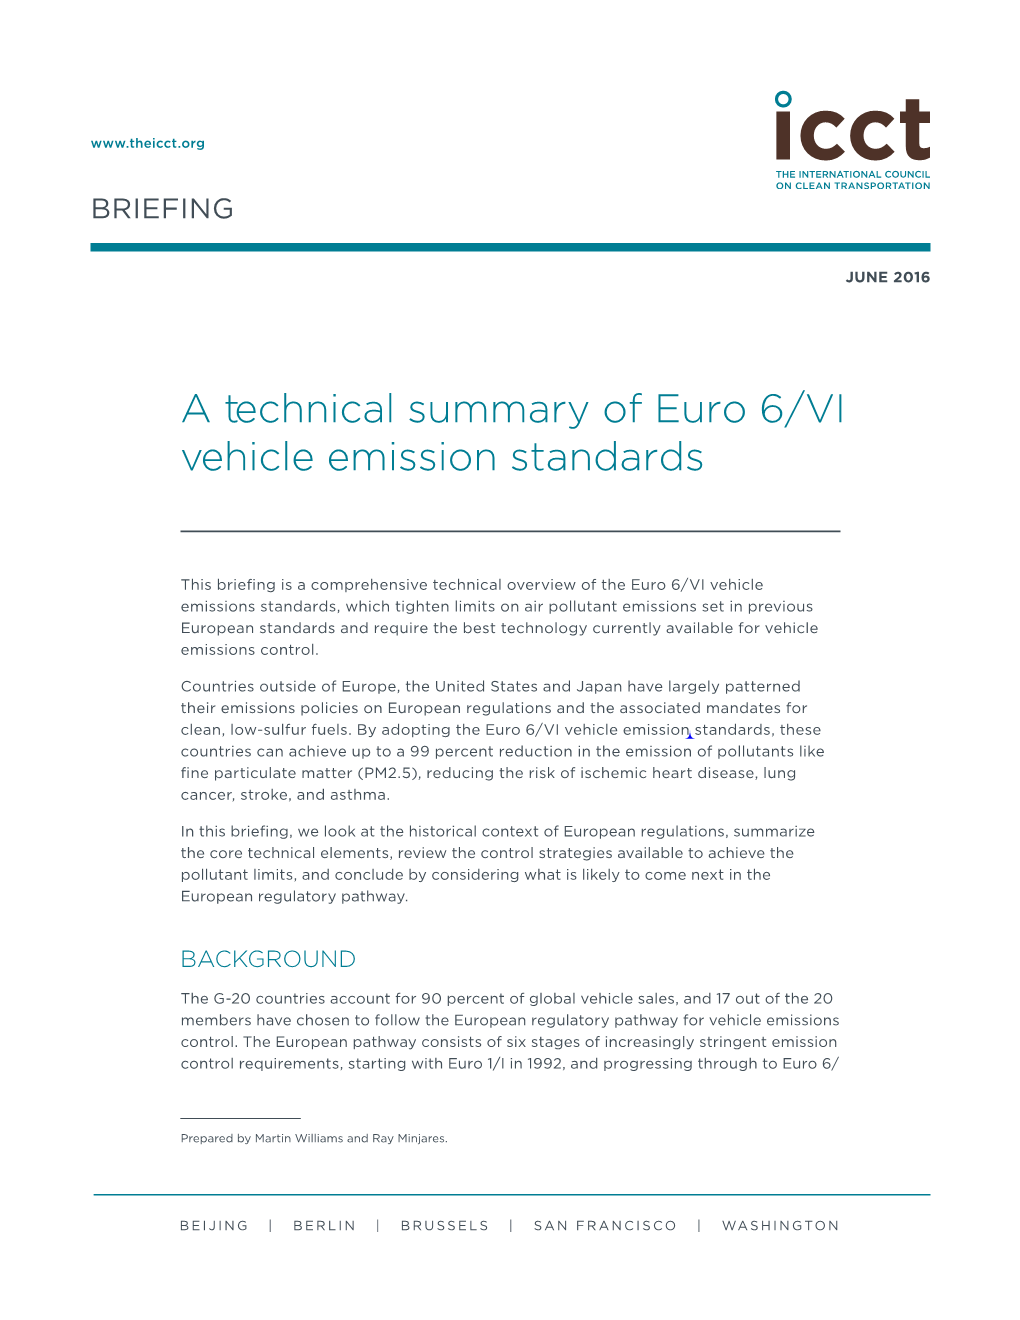 A Technical Summary of Euro 6/VI Vehicle Emission Standards